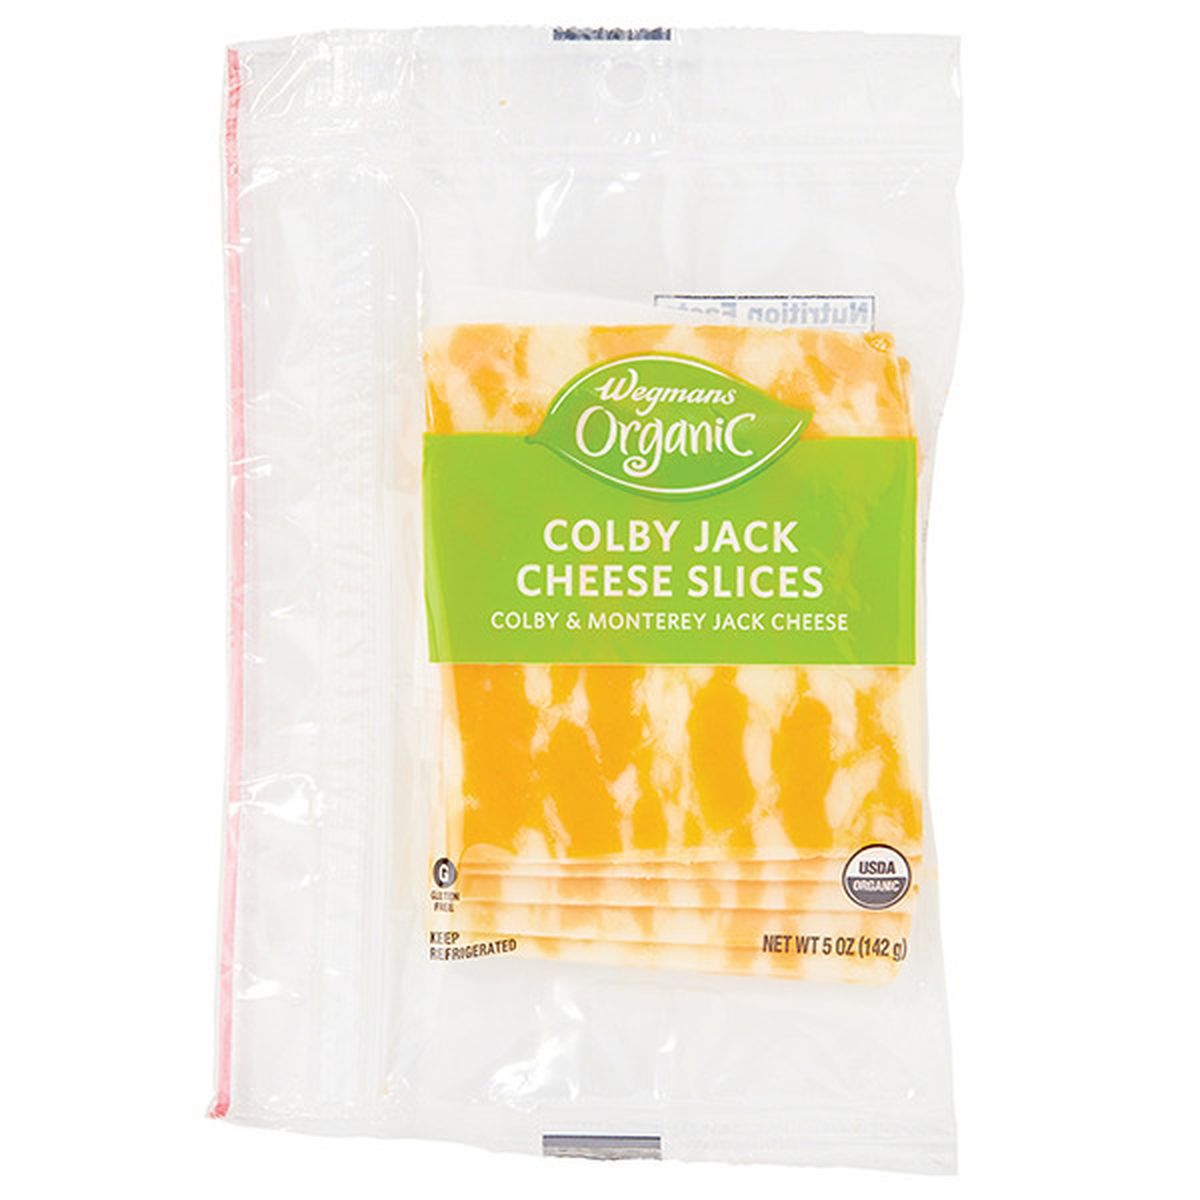 Calories in Wegmans Organic Colby Jack Cheese, Sliced